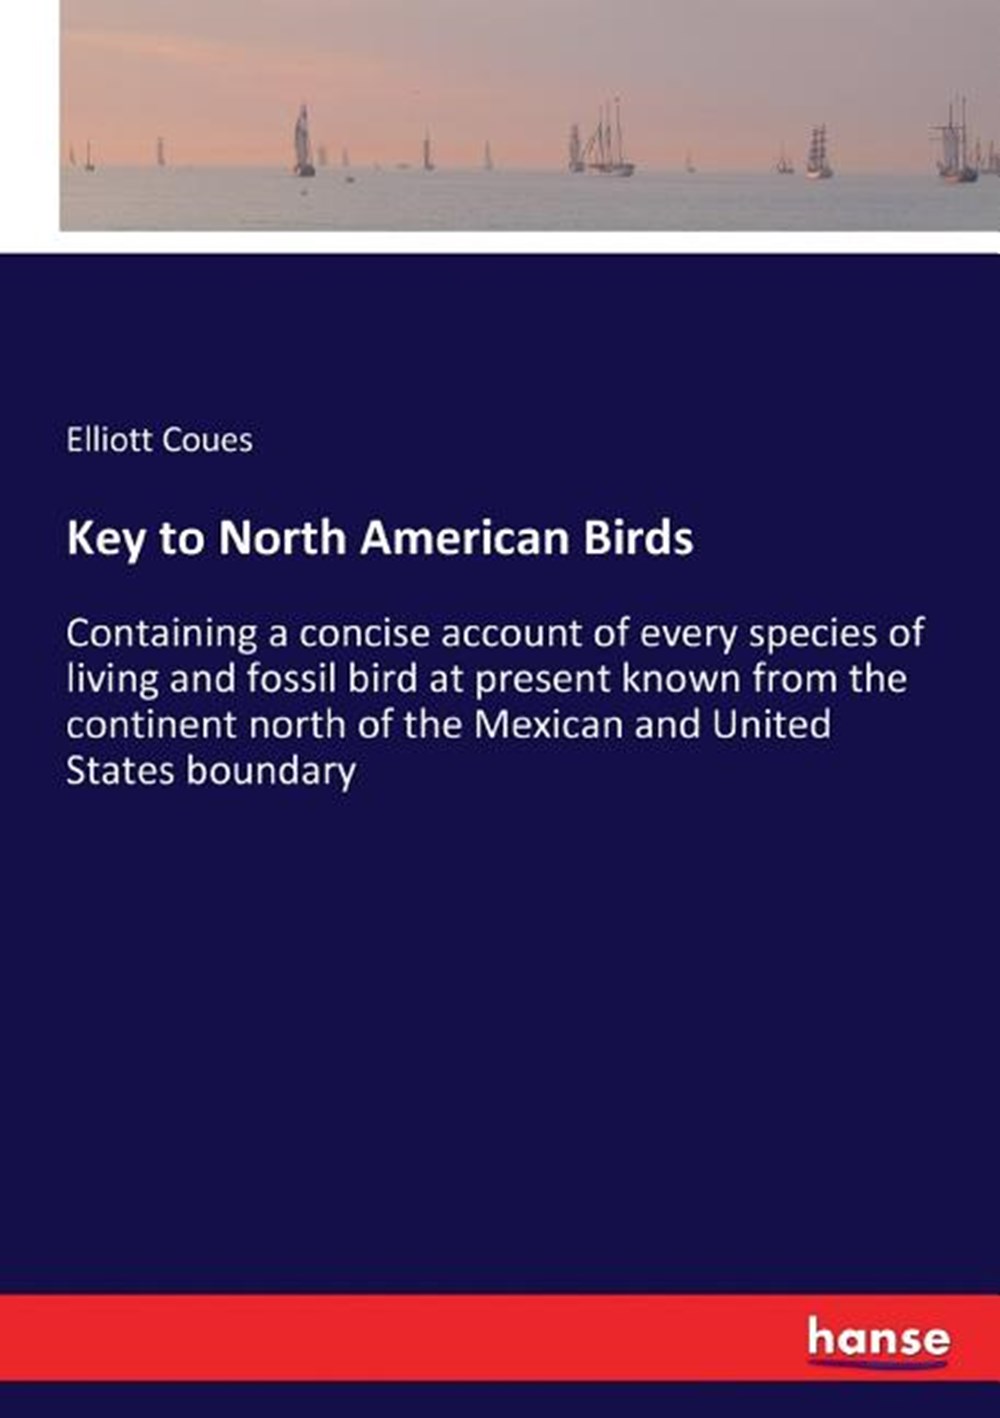 Key to North American Birds: Containing a concise account of every species of living and fossil bird